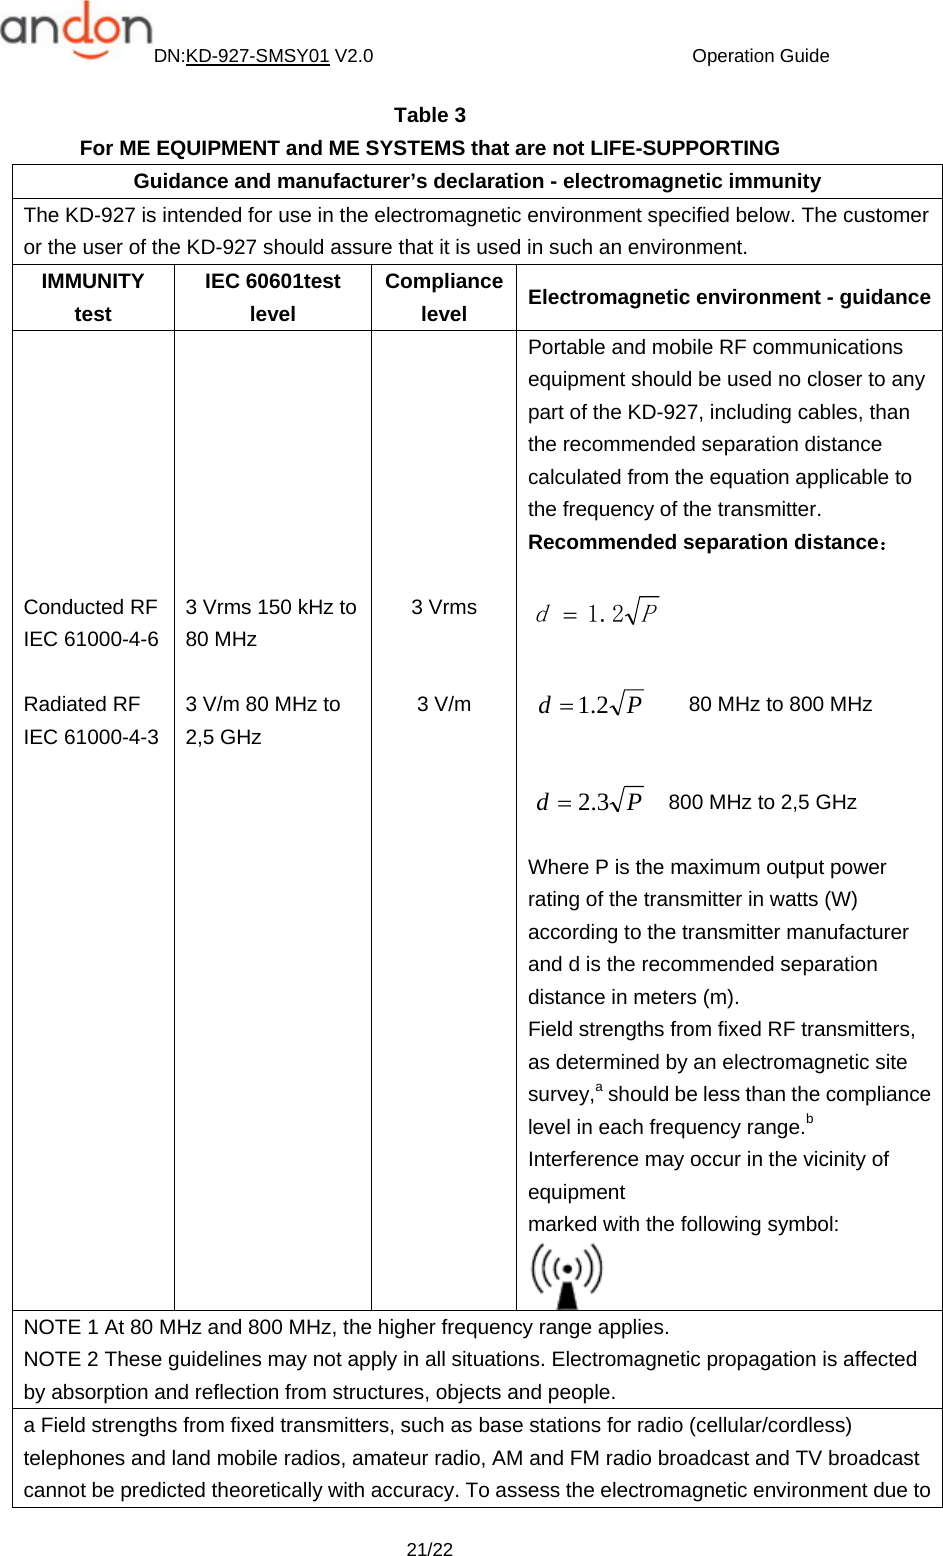 DN:KD-927-SMSY01 V2.0                                  Operation Guide  21/22 Table 3 For ME EQUIPMENT and ME SYSTEMS that are not LIFE-SUPPORTING Guidance and manufacturer’s declaration - electromagnetic immunity The KD-927 is intended for use in the electromagnetic environment specified below. The customer or the user of the KD-927 should assure that it is used in such an environment. IMMUNITY test IEC 60601test level Compliance level  Electromagnetic environment - guidance        Conducted RF IEC 61000-4-6  Radiated RF IEC 61000-4-3         3 Vrms 150 kHz to 80 MHz  3 V/m 80 MHz to 2,5 GHz         3 Vrms   3 V/m Portable and mobile RF communications equipment should be used no closer to any part of the KD-927, including cables, than the recommended separation distance calculated from the equation applicable to the frequency of the transmitter. Recommended separation distance：         80 MHz to 800 MHz   800 MHz to 2,5 GHz  Where P is the maximum output power rating of the transmitter in watts (W) according to the transmitter manufacturer and d is the recommended separation distance in meters (m). Field strengths from fixed RF transmitters, as determined by an electromagnetic site survey,a should be less than the compliance level in each frequency range.b Interference may occur in the vicinity of equipment marked with the following symbol:  NOTE 1 At 80 MHz and 800 MHz, the higher frequency range applies. NOTE 2 These guidelines may not apply in all situations. Electromagnetic propagation is affected by absorption and reflection from structures, objects and people. a Field strengths from fixed transmitters, such as base stations for radio (cellular/cordless) telephones and land mobile radios, amateur radio, AM and FM radio broadcast and TV broadcast cannot be predicted theoretically with accuracy. To assess the electromagnetic environment due to Pd2.1=Pd 2.1=Pd 3.2=